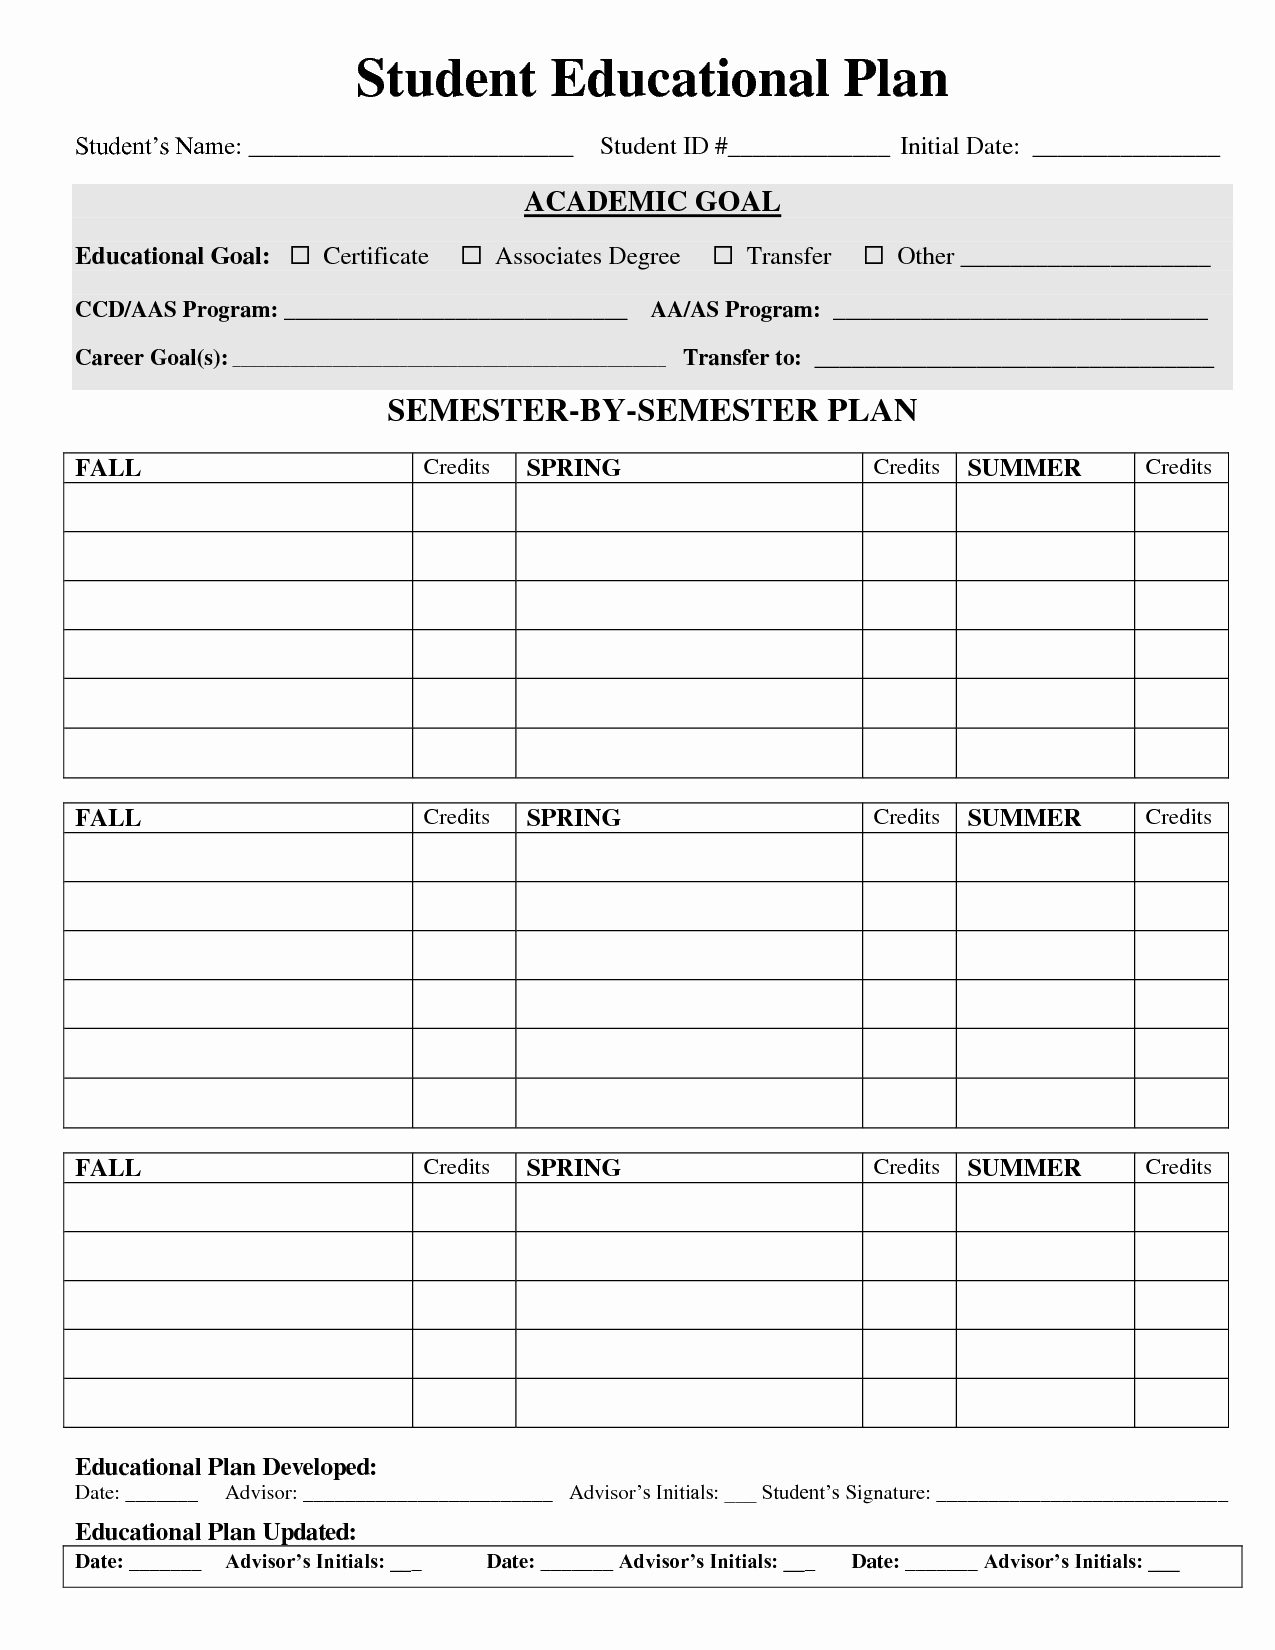 Study Plan Template for Students Luxury Student Educational Plan Doc